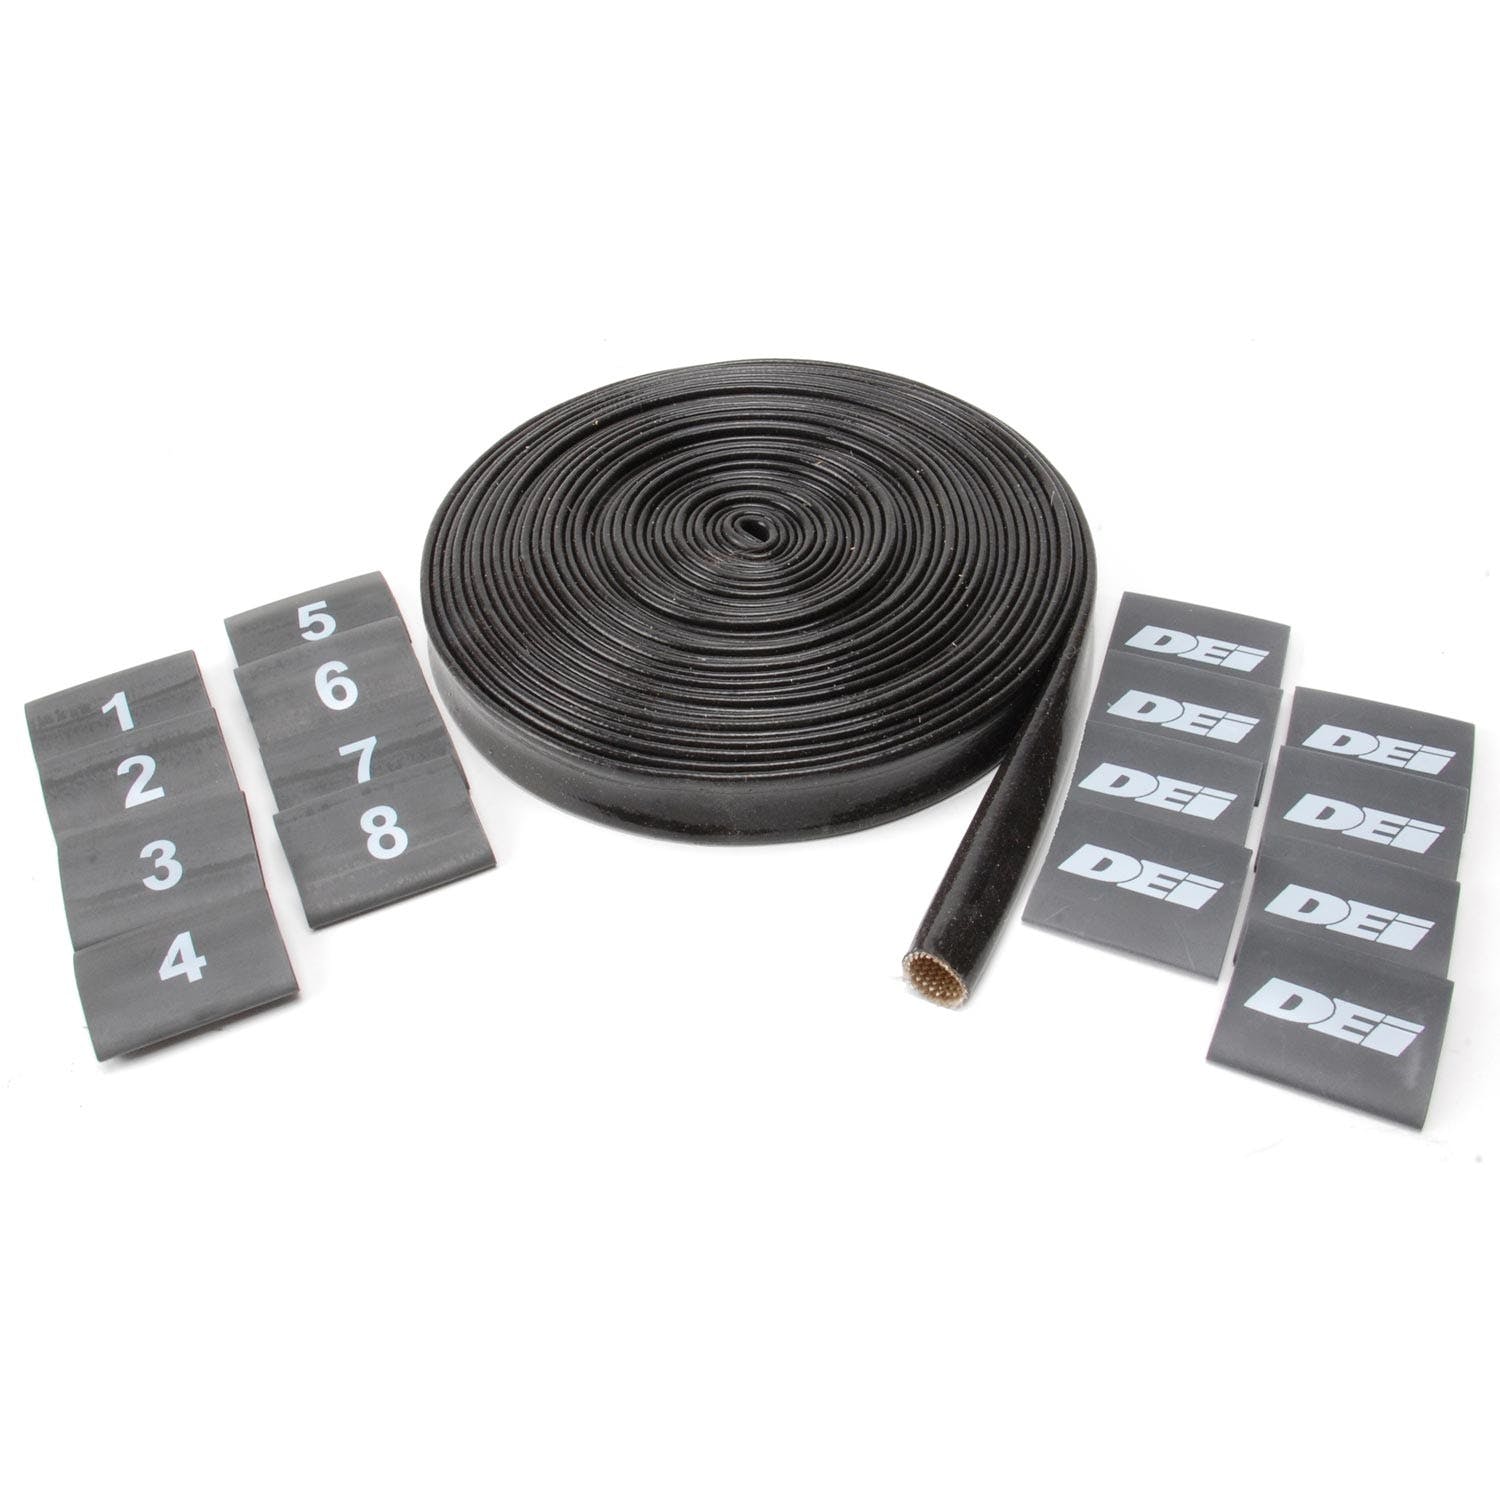 Design Engineering, Inc. 10636 Protect-A-Sleeve Black Silicone. 25ft. with wire markers and ends. 3/8in. ID